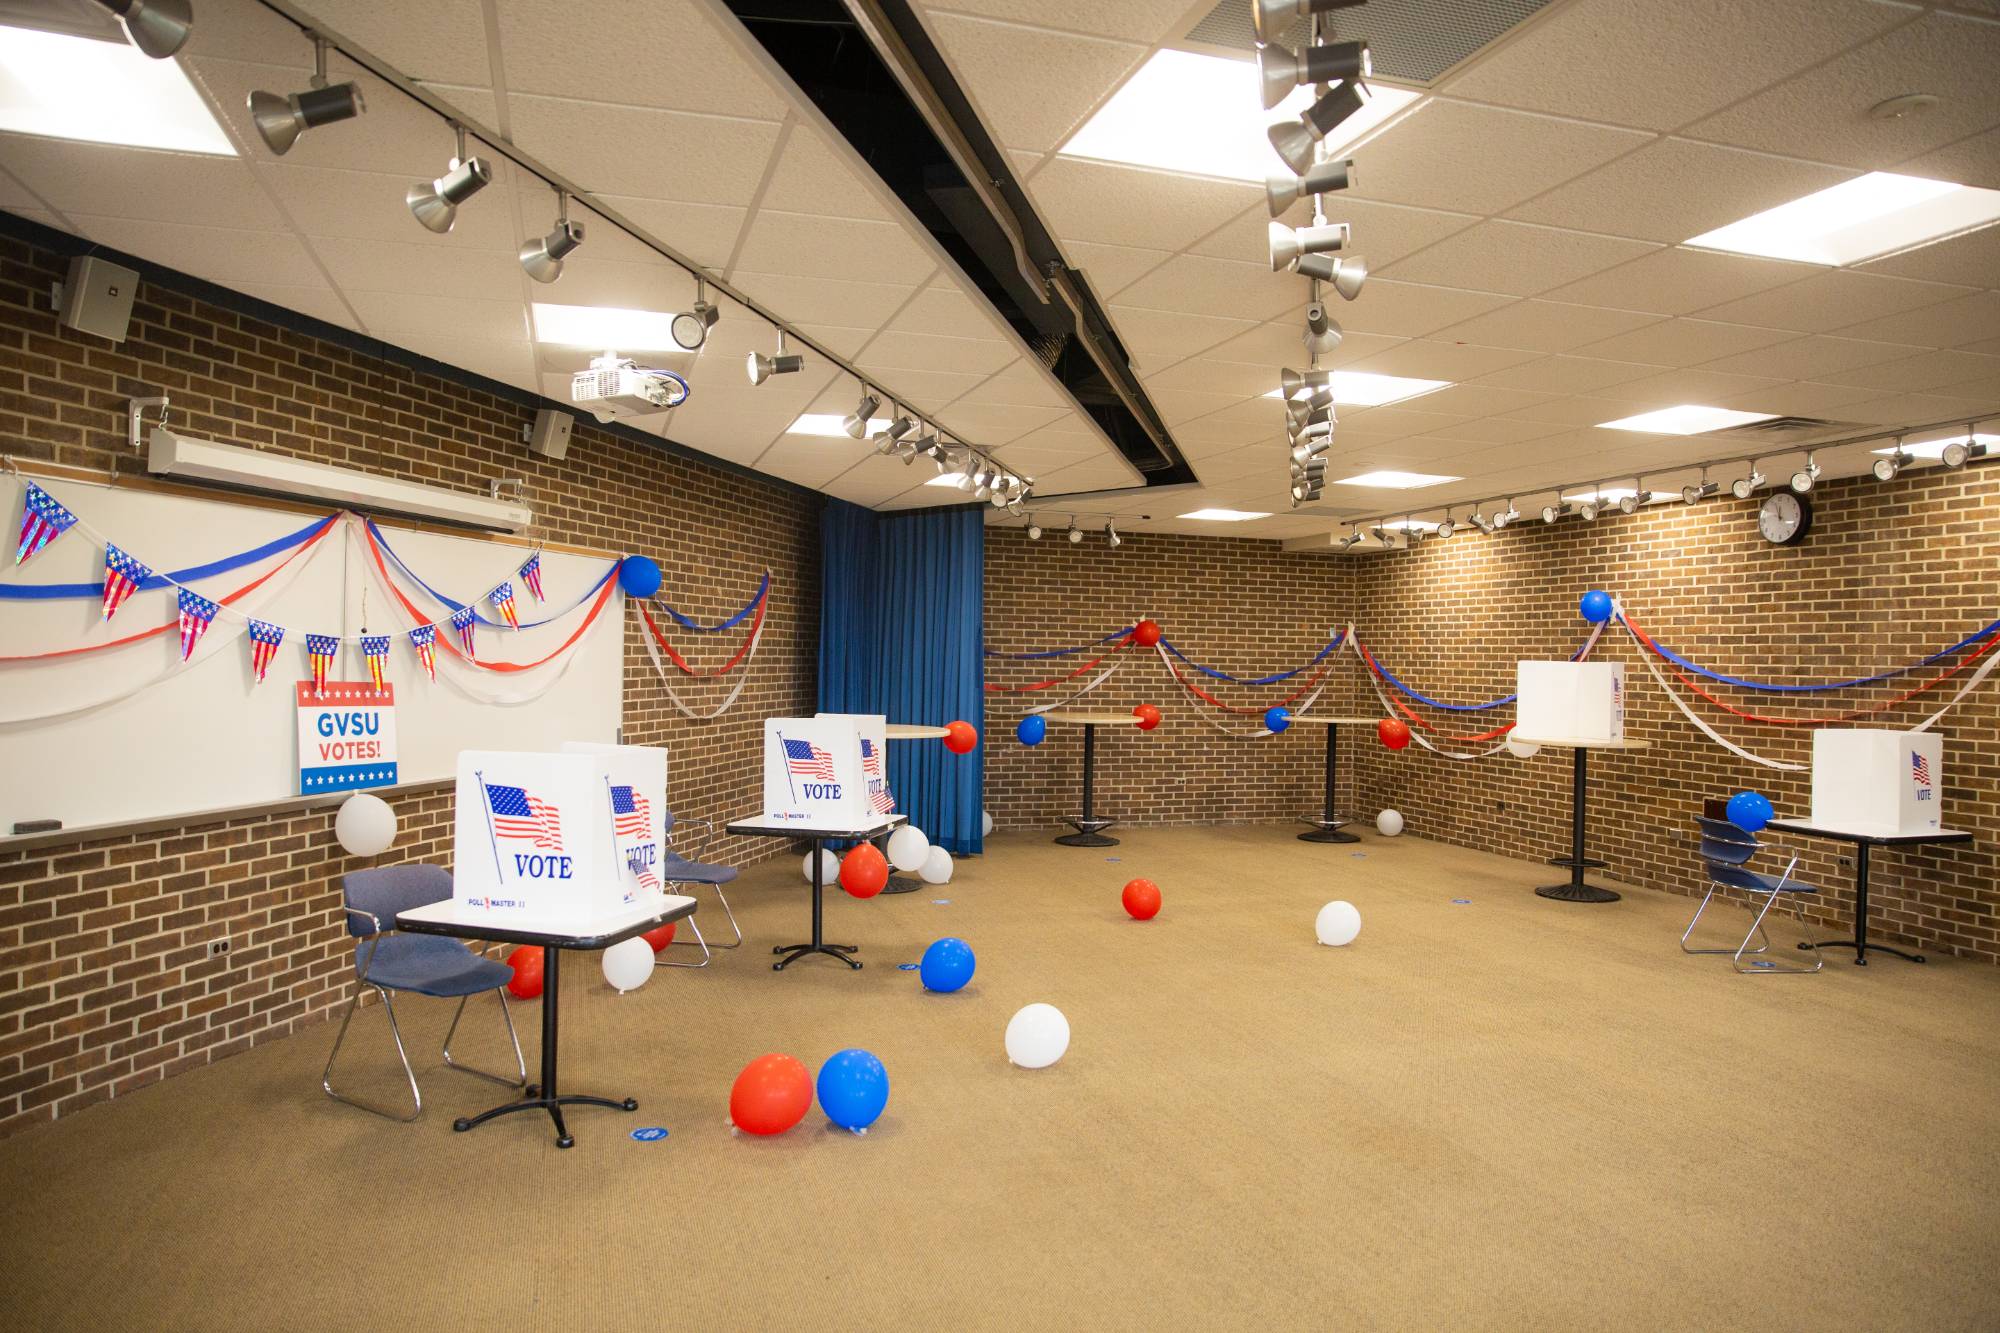 Several voting booths with red, white, and blue decorations and balloons.